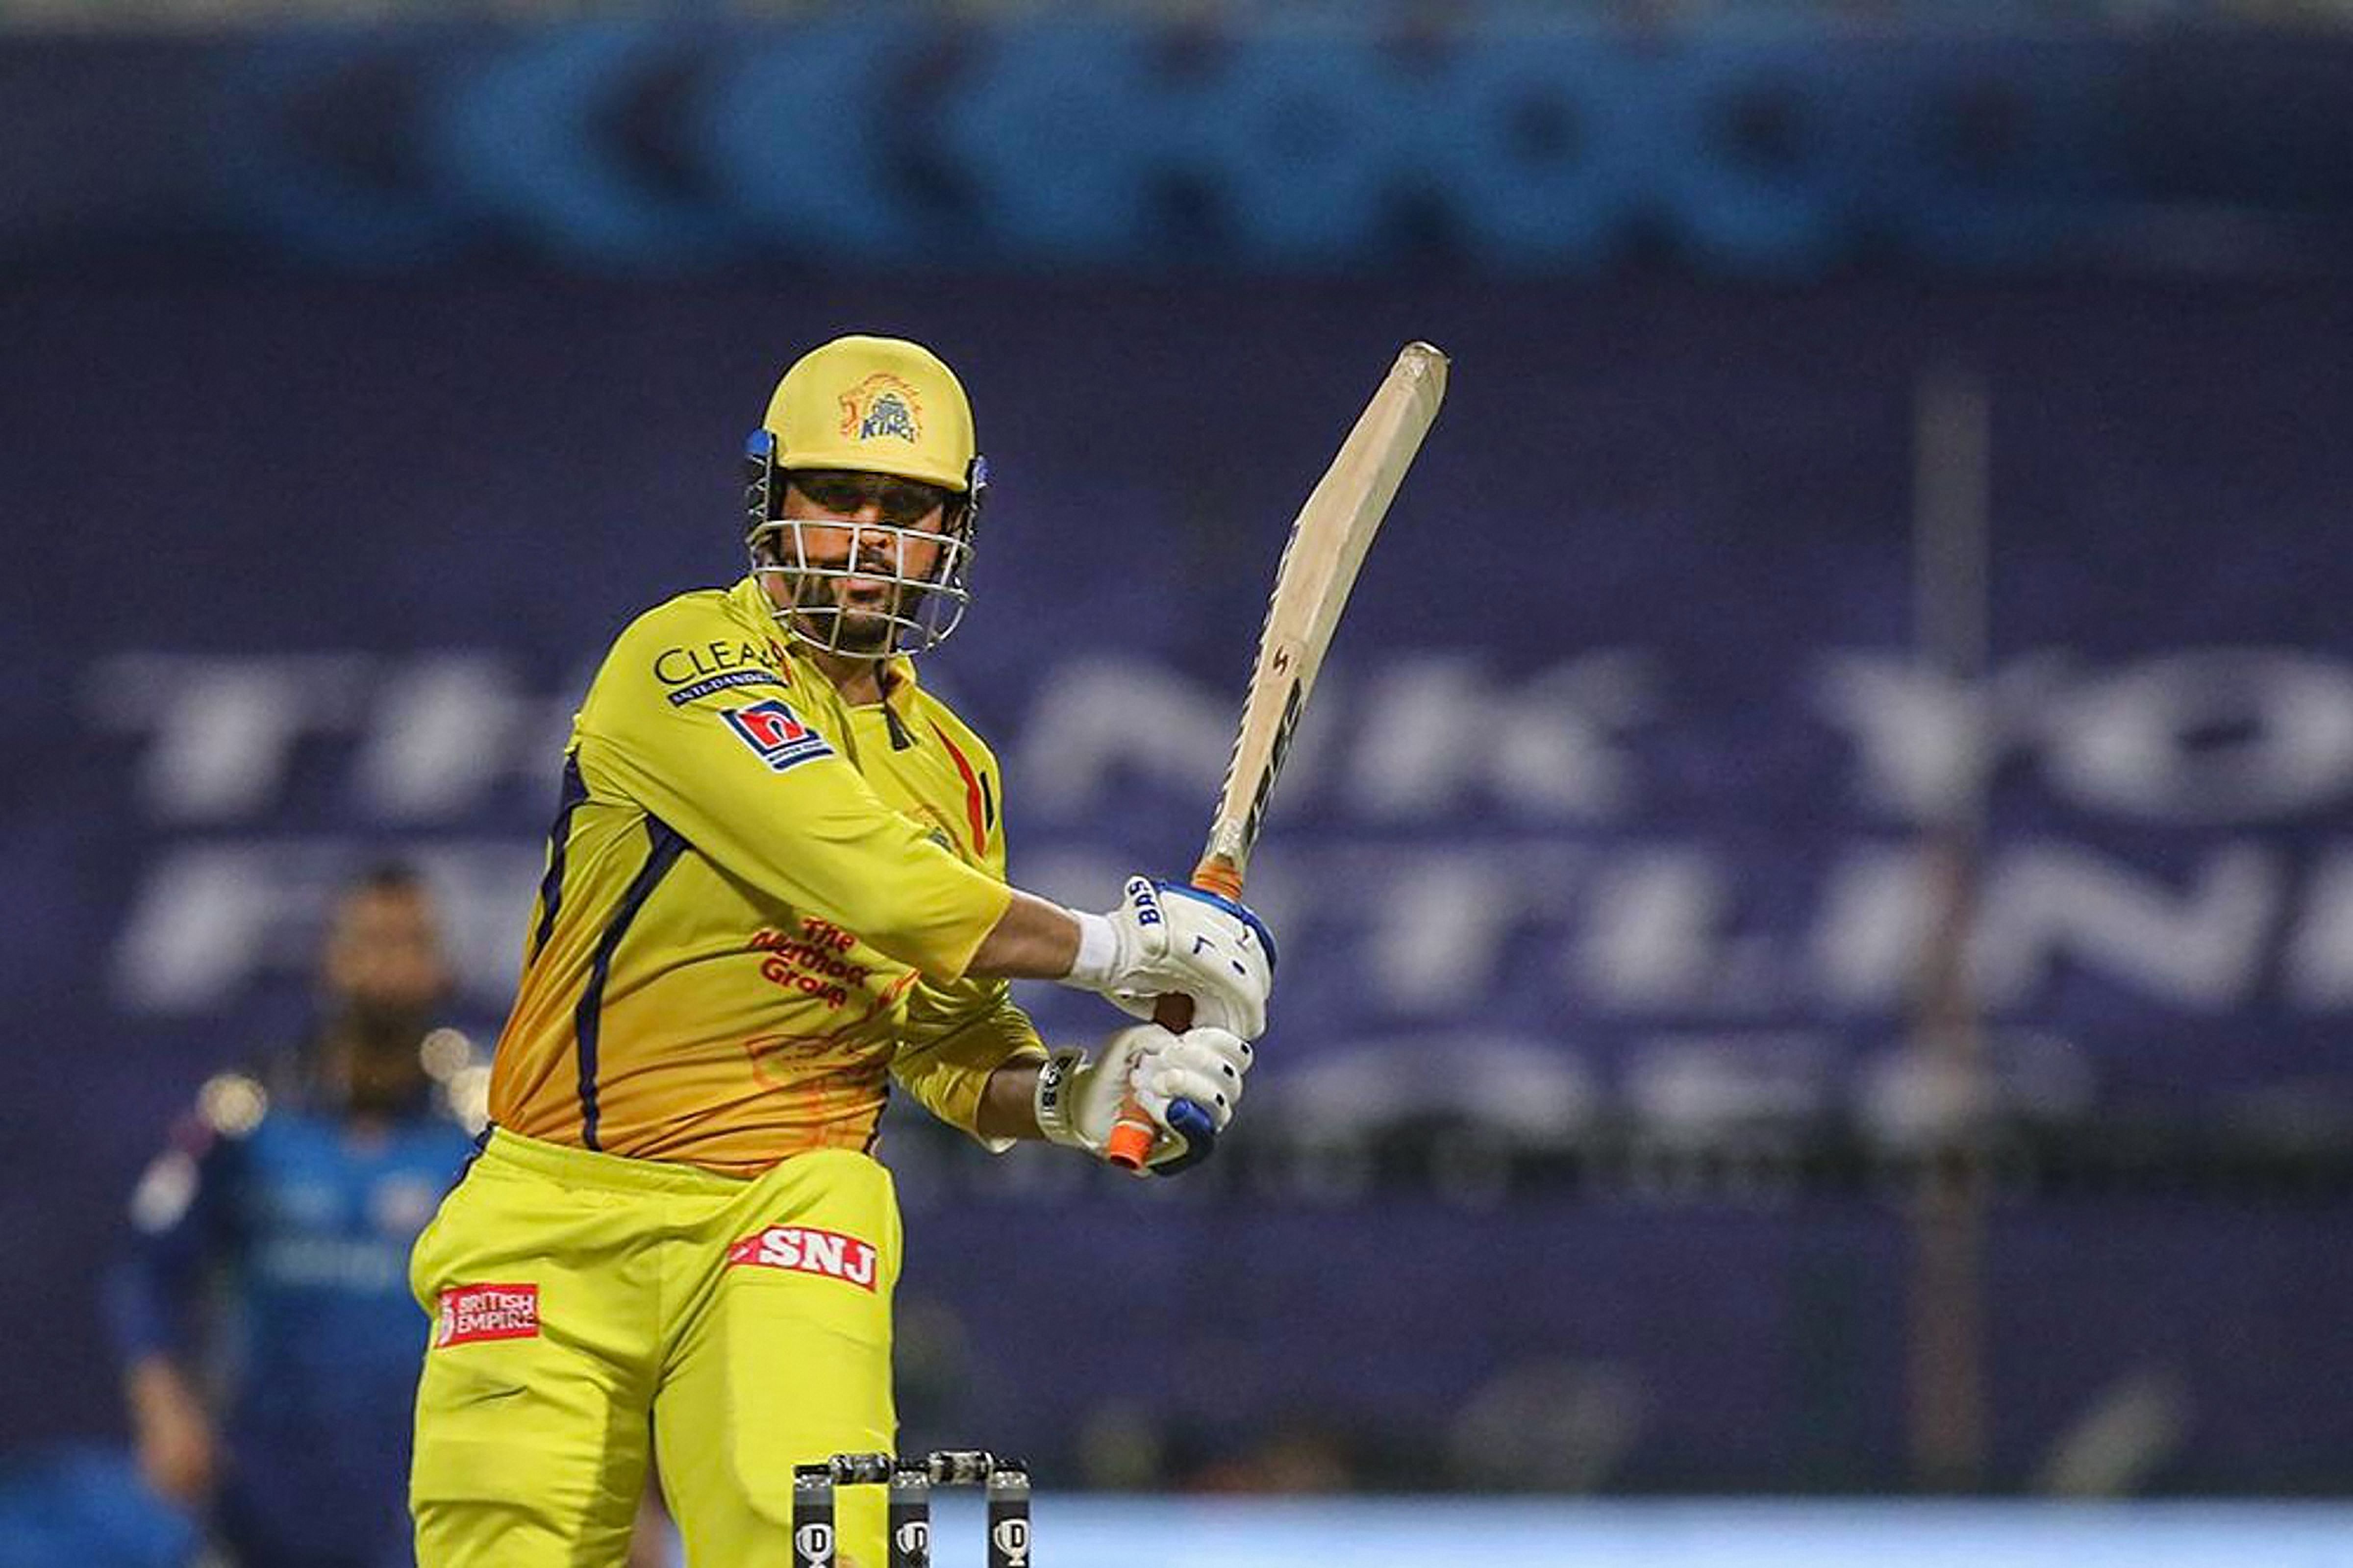 CSK Skipper MS Dhoni plays a shot during the first cricket match of IPL 2020 against Mumbai Indians. Credits: PTI Photo